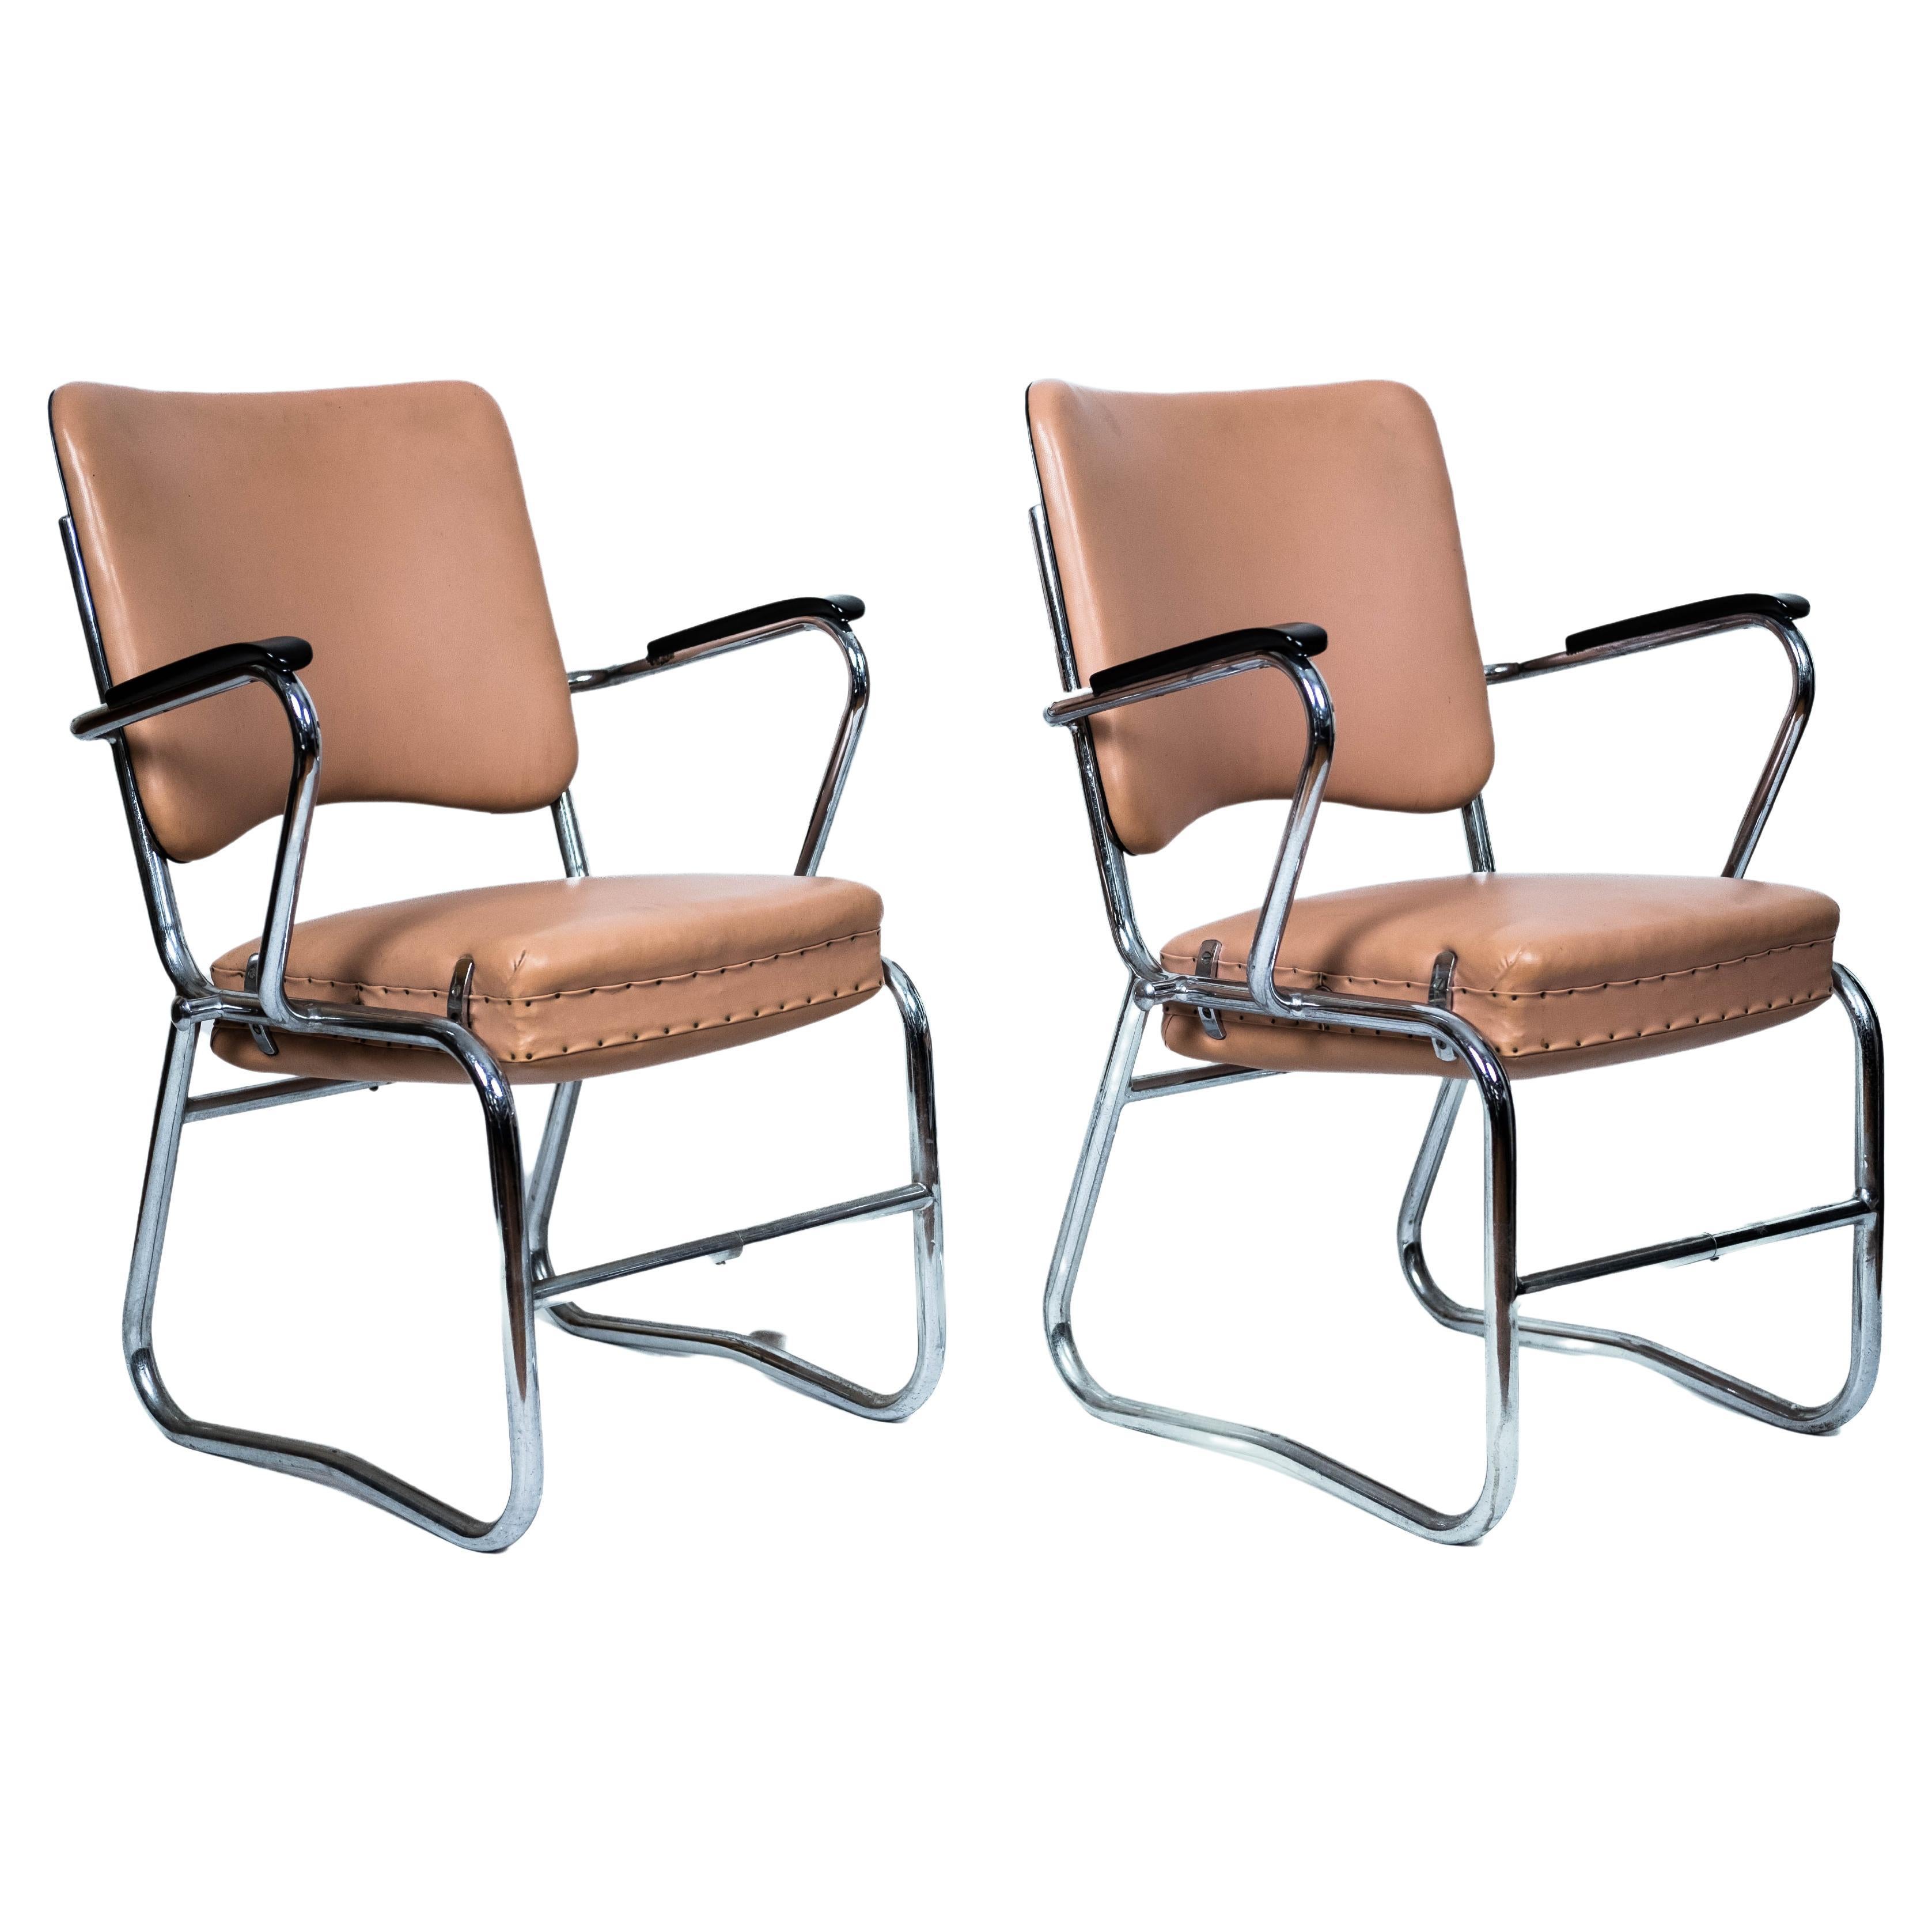 2 x Pink Midcentury Steelpipe-Armchair with rotatable seat (Netherlands, 1945) For Sale